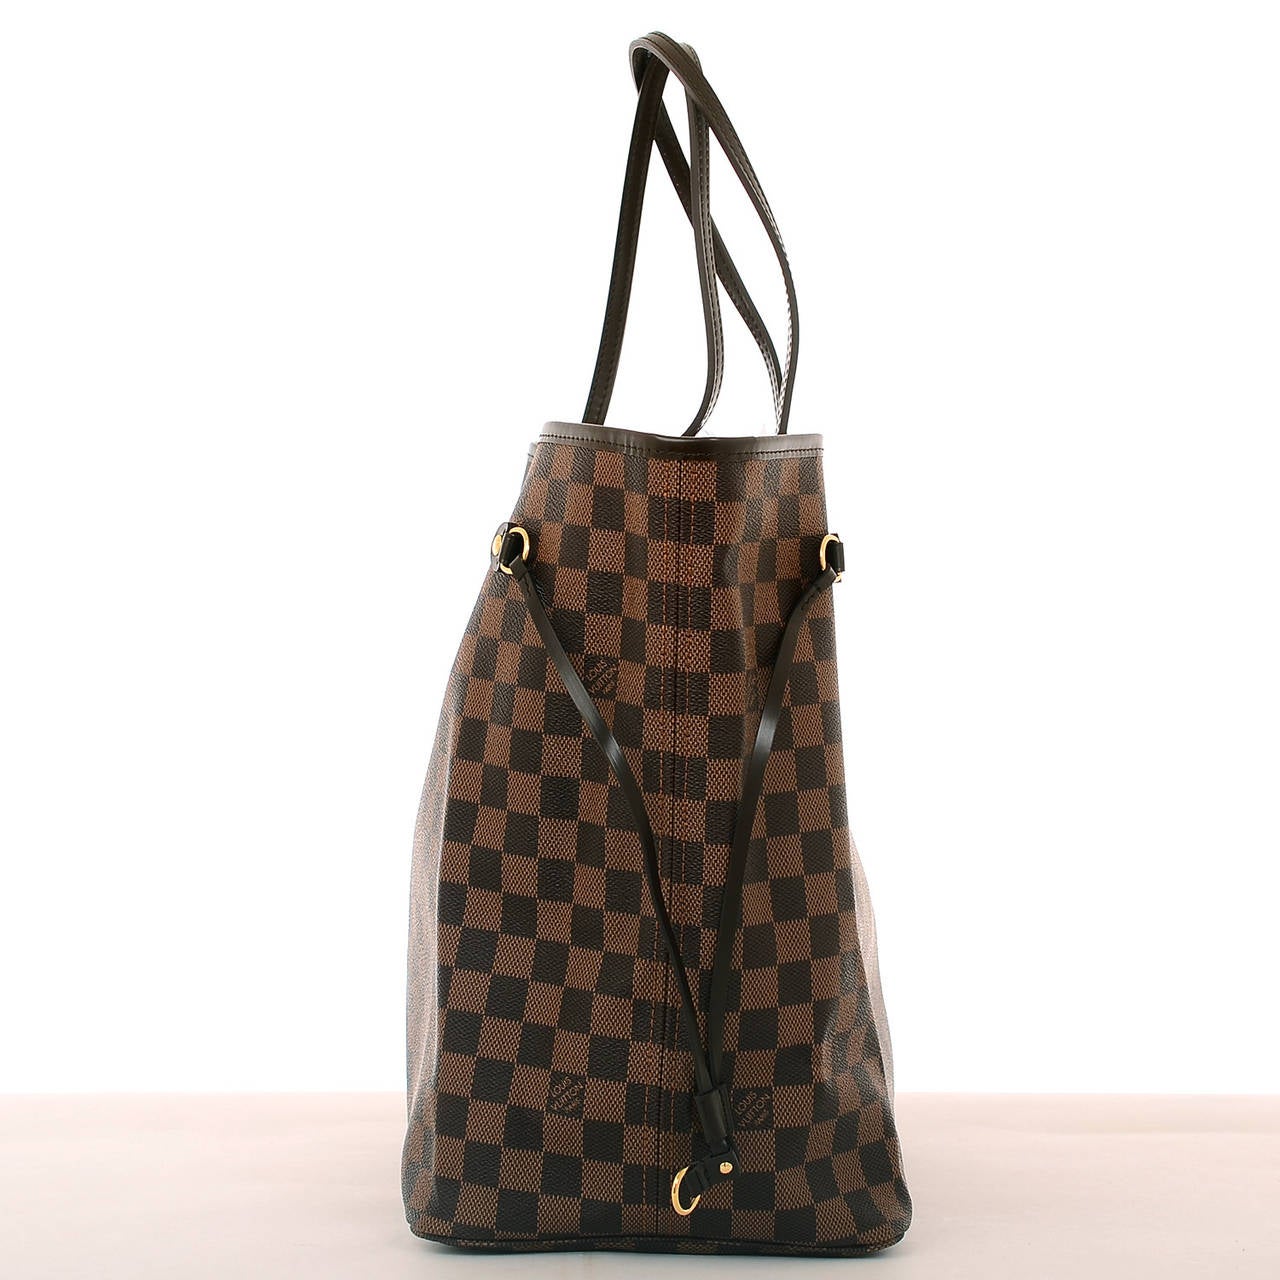 Louis Vuitton dark and light brown checkered Damier Ebene Neverfull GM of coated canvas with smooth brown leather trim.

This classic tote features polished brass hardware, adjustable drawstring sides, hidden top hook closure and double flat